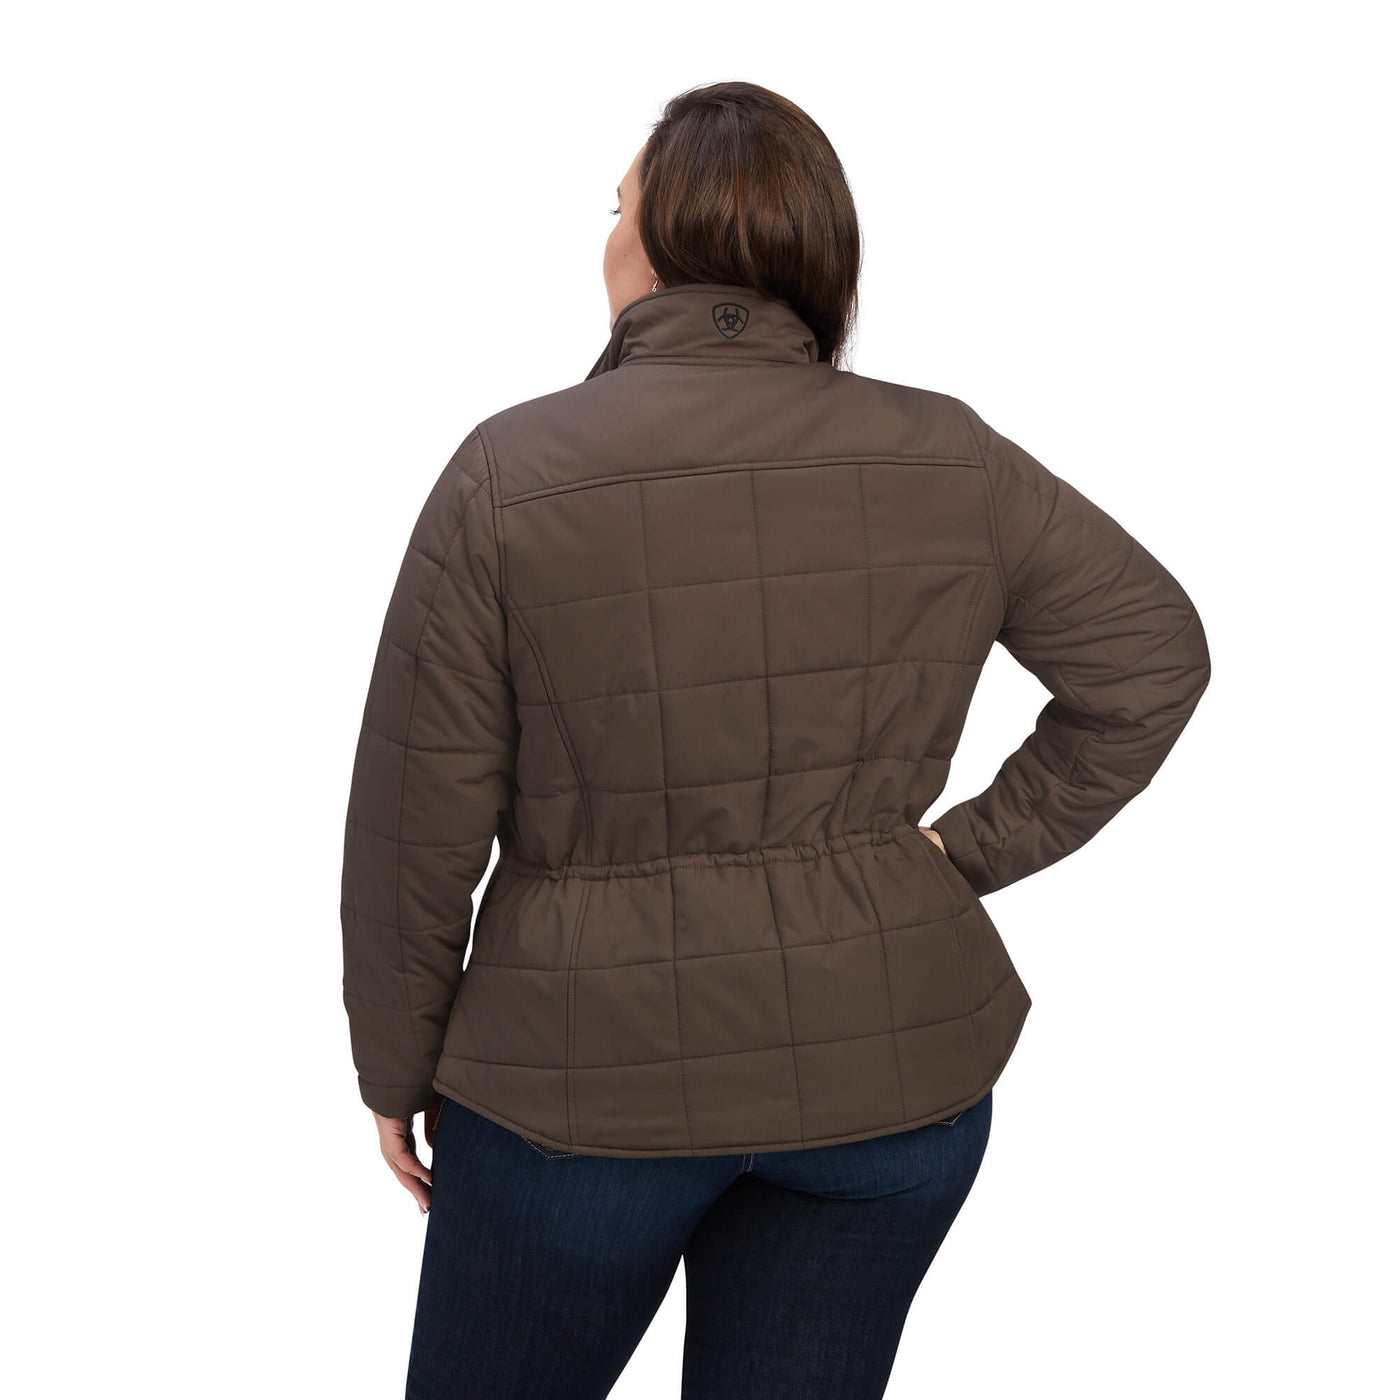 Crius Conceal Carry Jacket